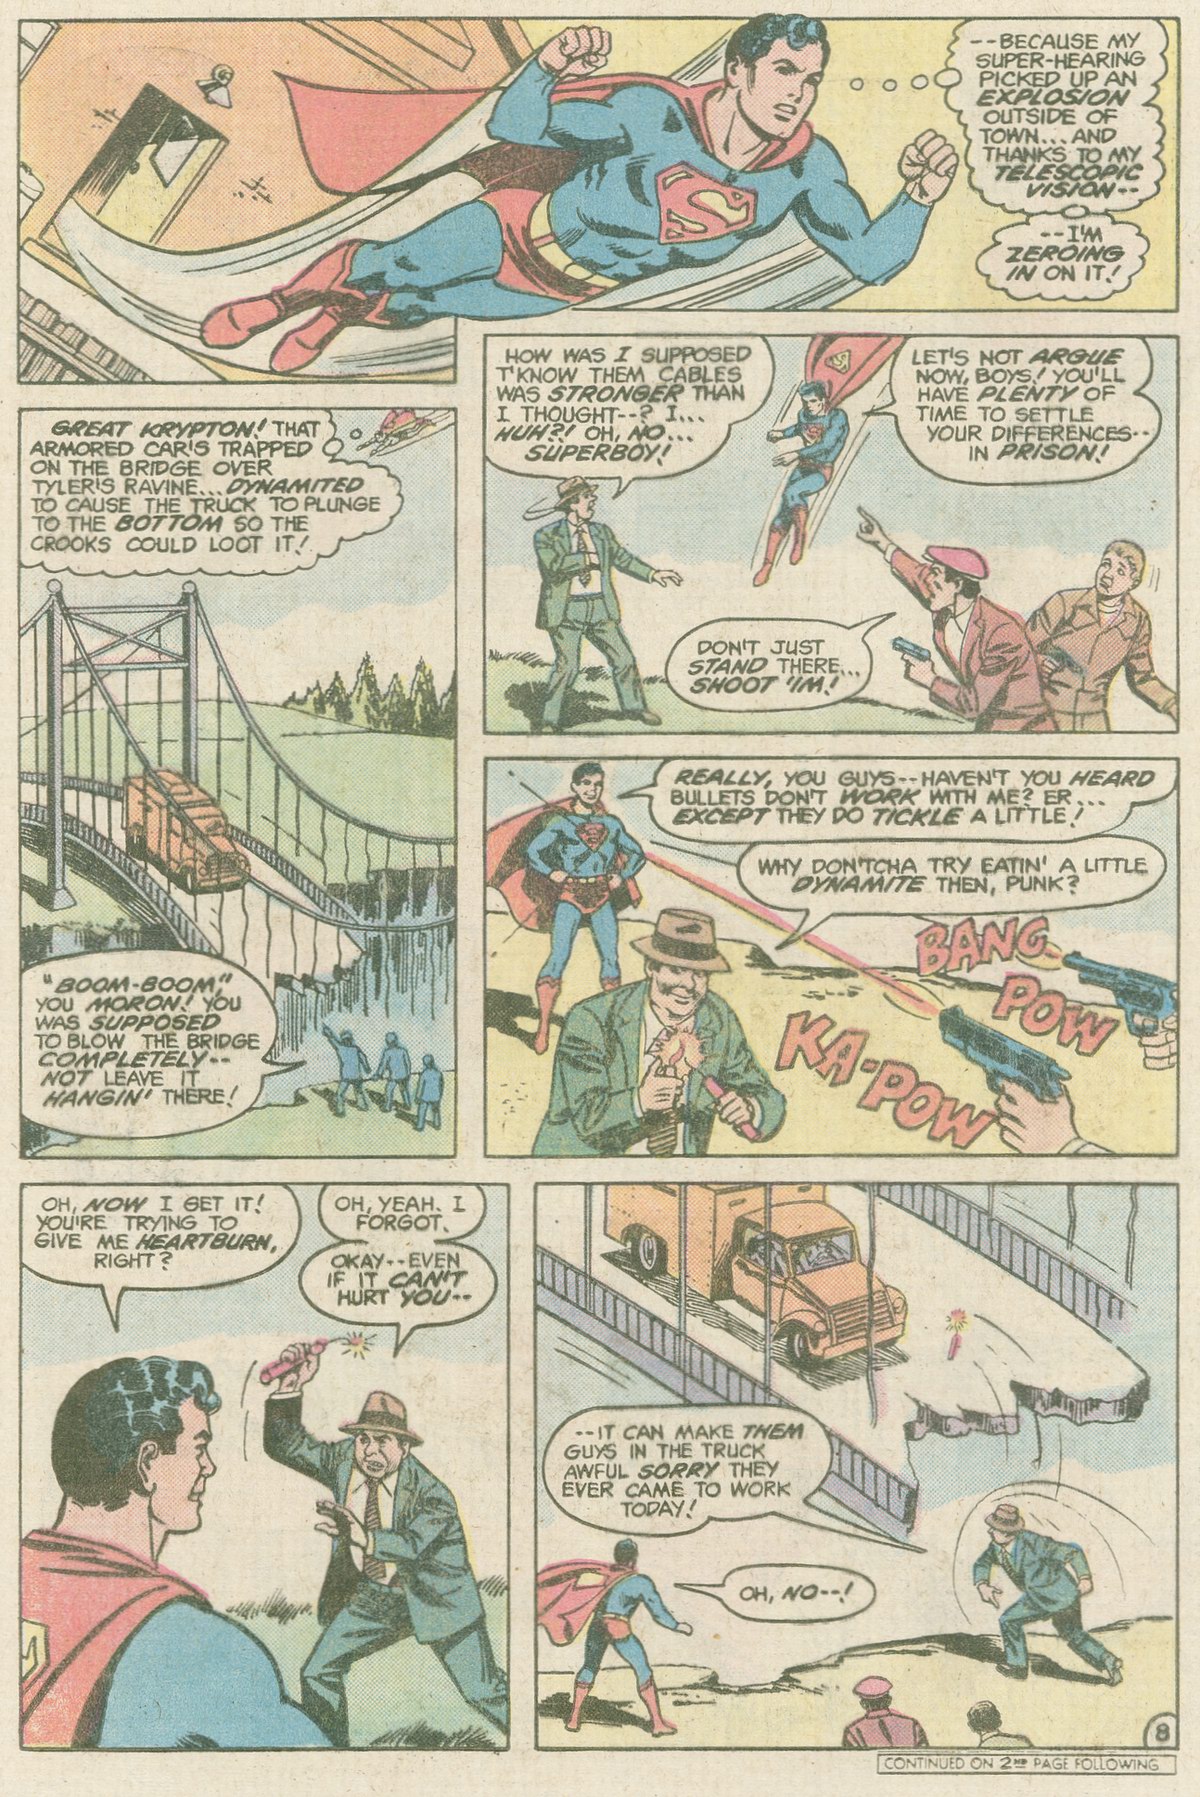 The New Adventures of Superboy 40 Page 8